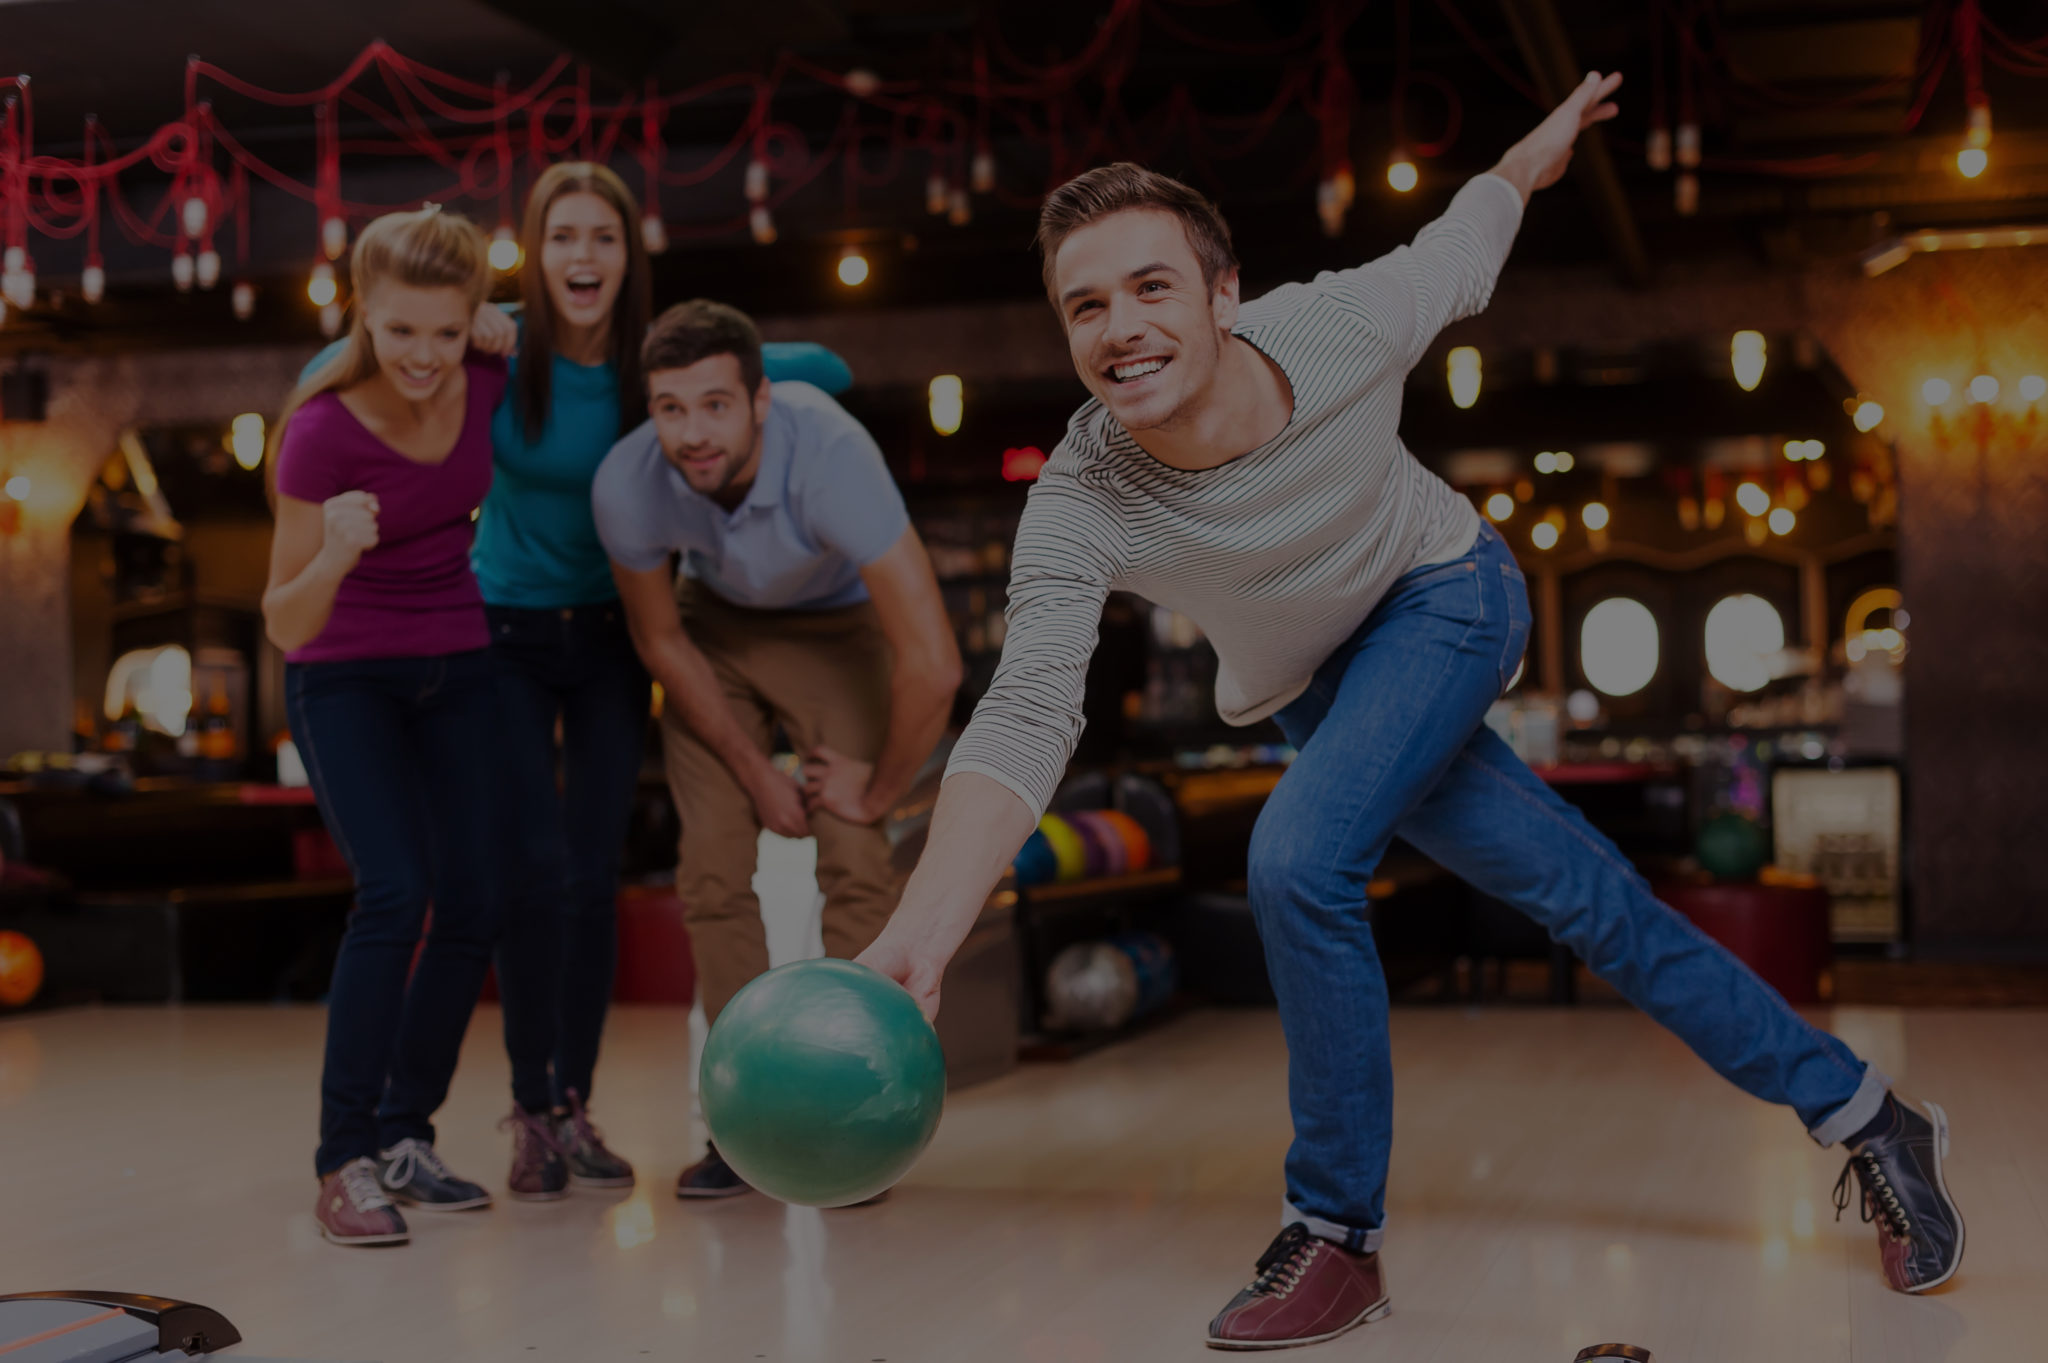 He is a winner. Handsome young men throwing a bowling ball while three people cheering